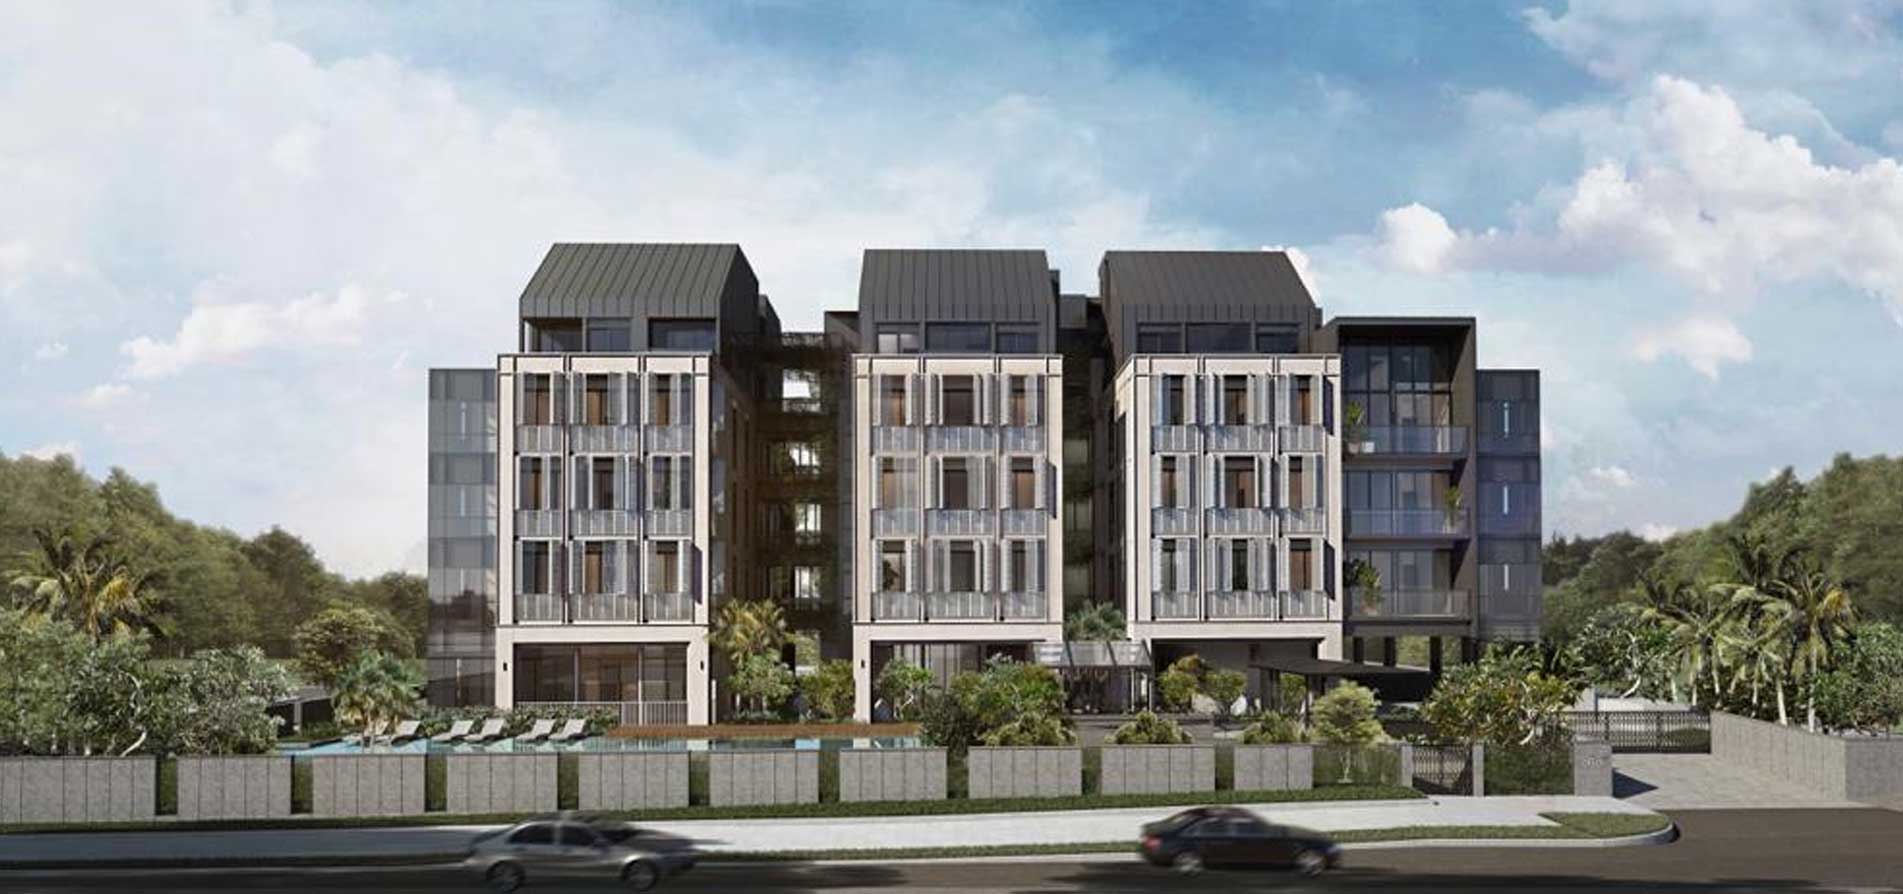 Image of Geylang New Launch Condo Olloi's Facade with Artist Impression.